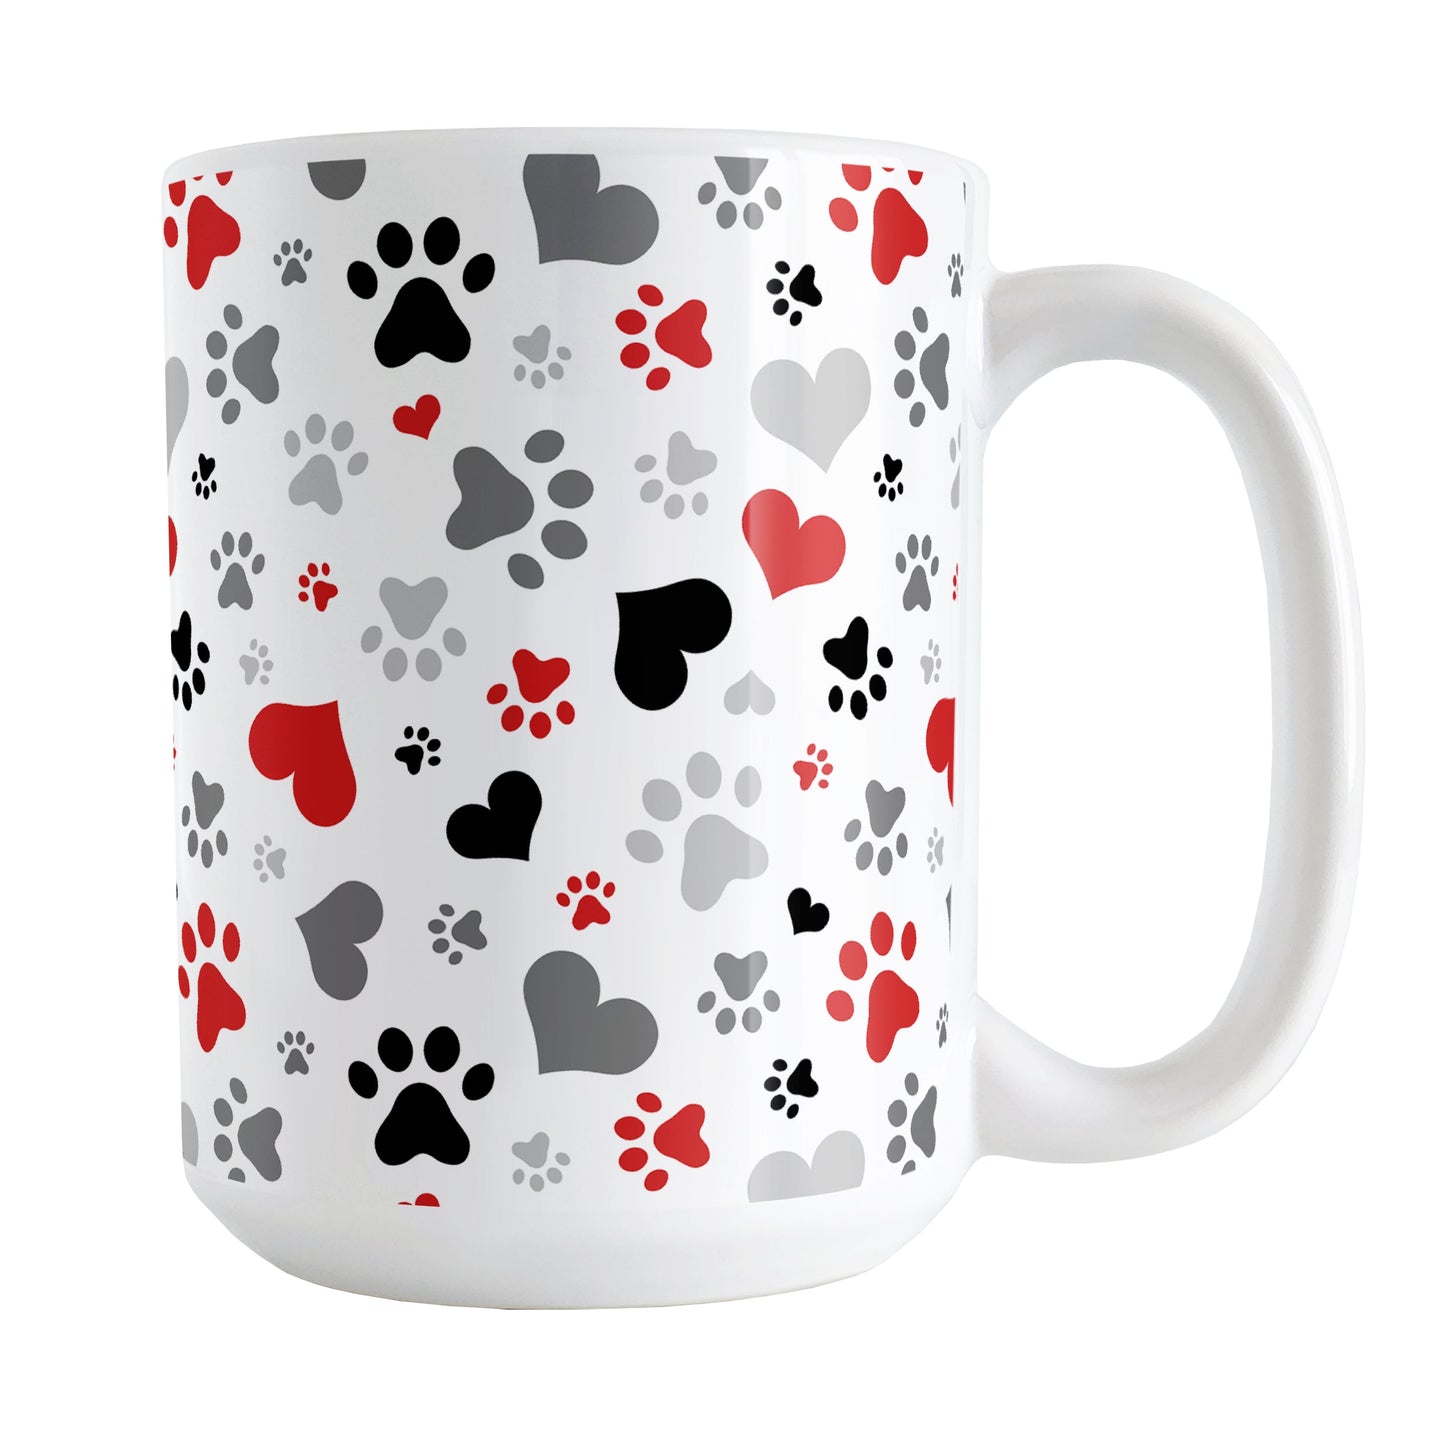 Black and Red Hearts and Paw Prints Mug (15oz) at Amy's Coffee Mugs. A ceramic coffee mug designed with a pattern of hearts and paw prints in red and different shades of black and gray that wraps around the mug to the handle. This mug is perfect for people love dogs and cute paw print designs.